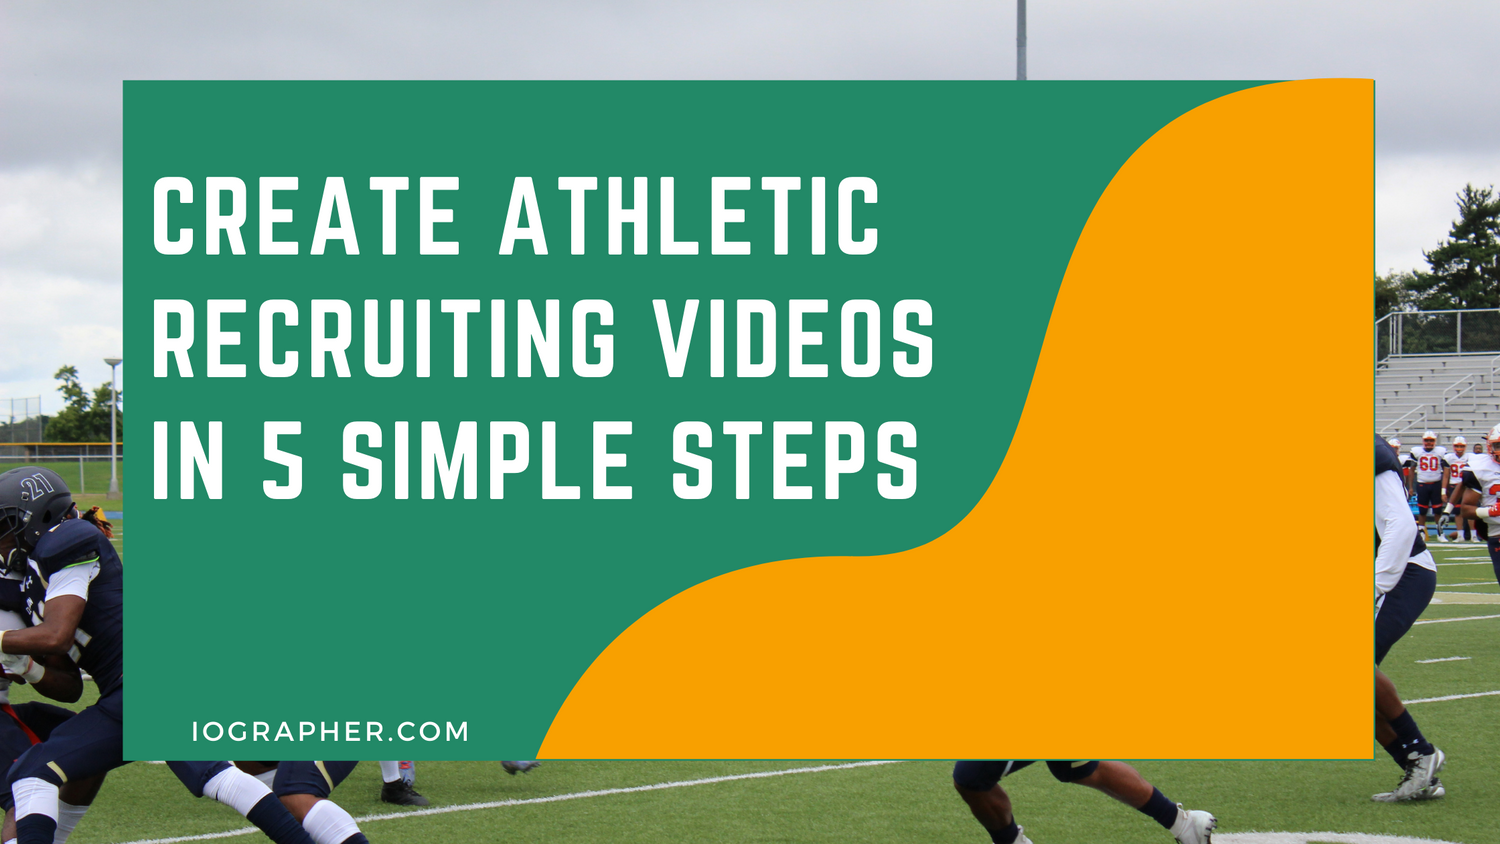 Create Athletic Recruiting Videos in 5 Simple Steps